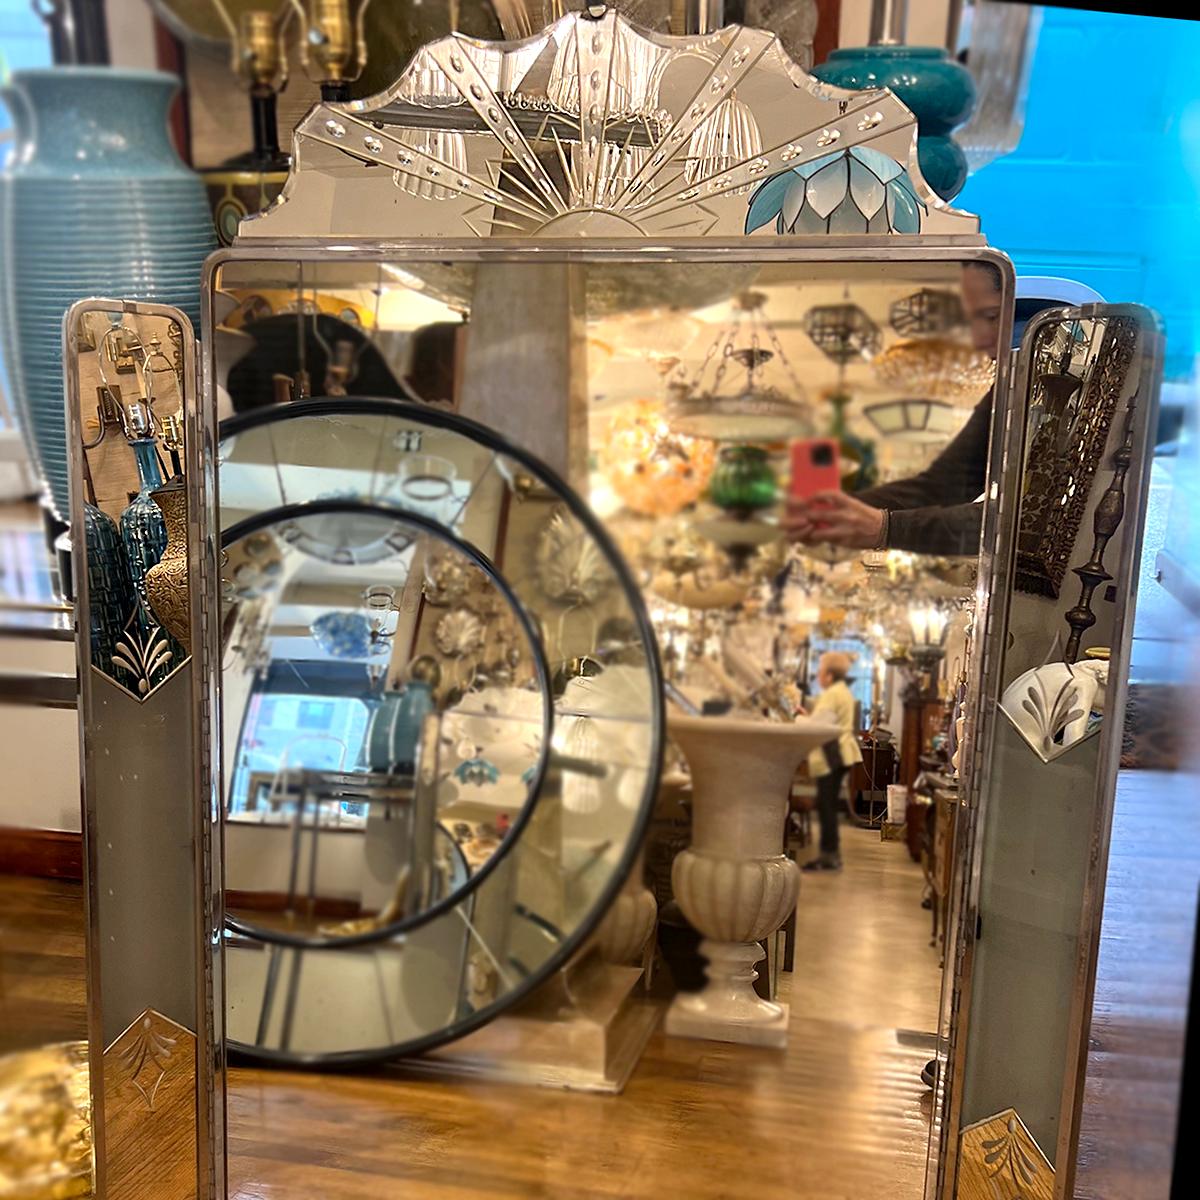 French circa 1920s Art Deco Mirror with etched details and with lights on the swivel wings.

Measurements:
Height: 47.5